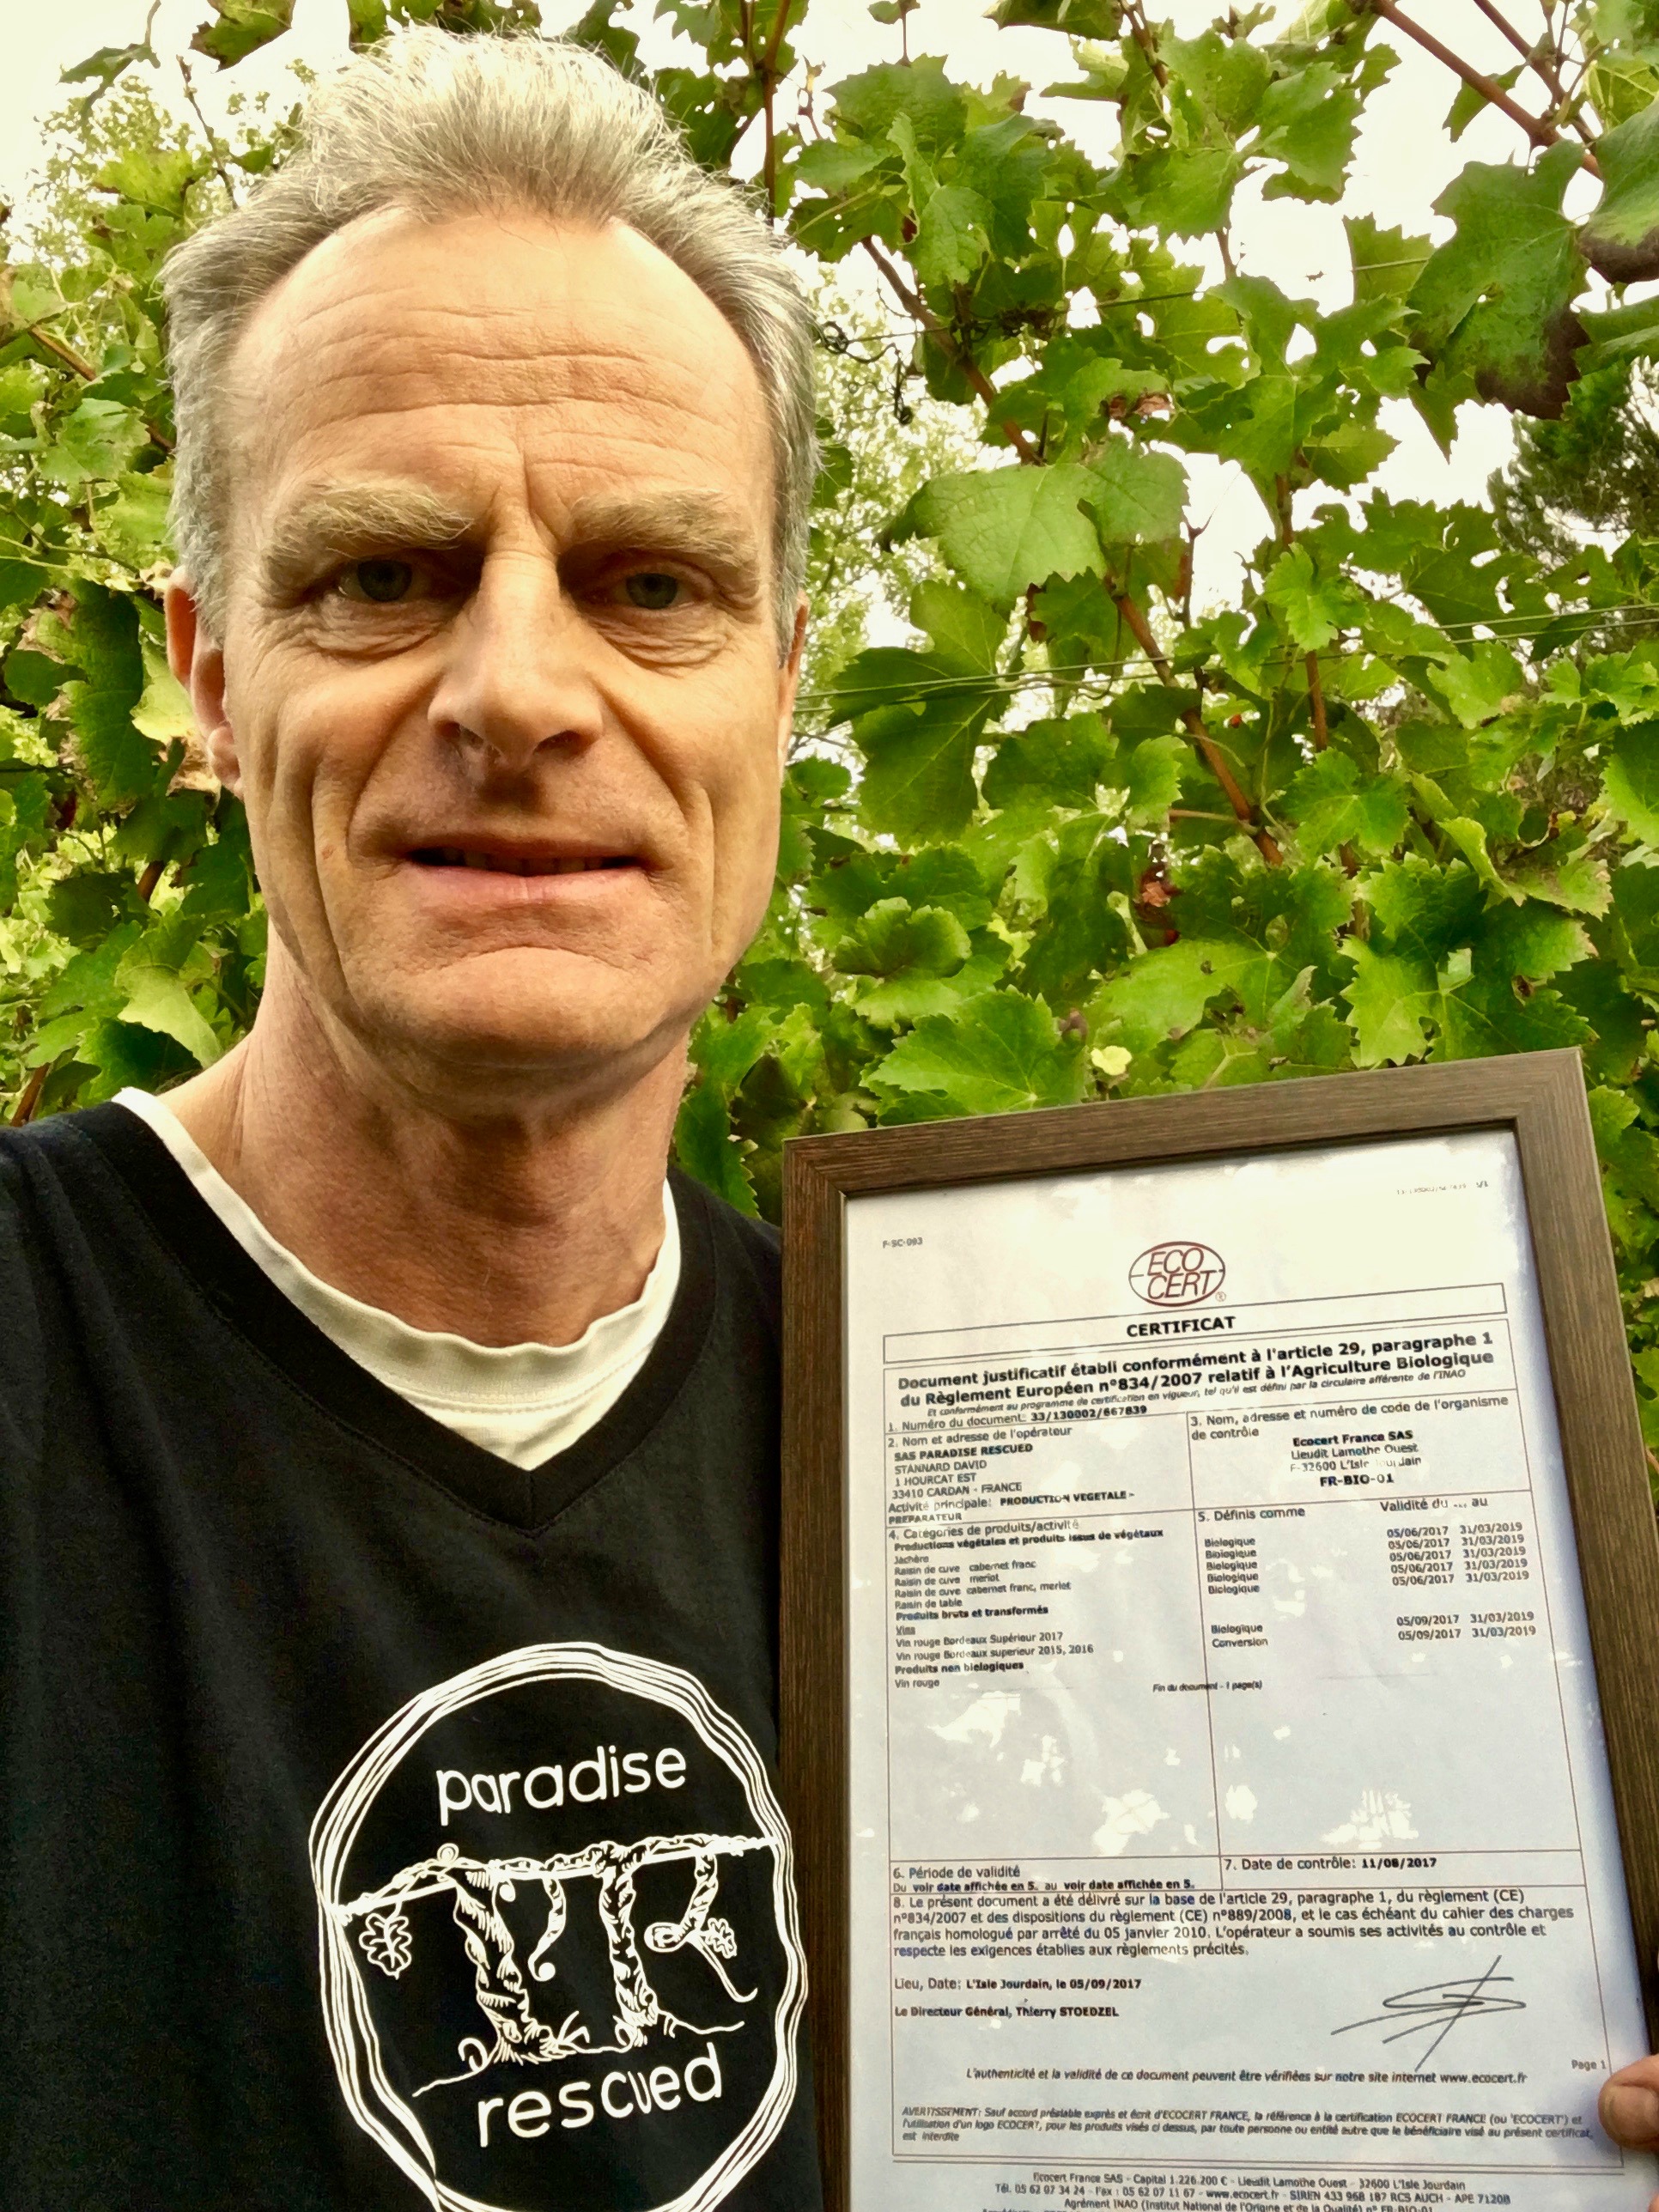 Paradise Rescued Founder Director David Stannard with their Organic Certification.